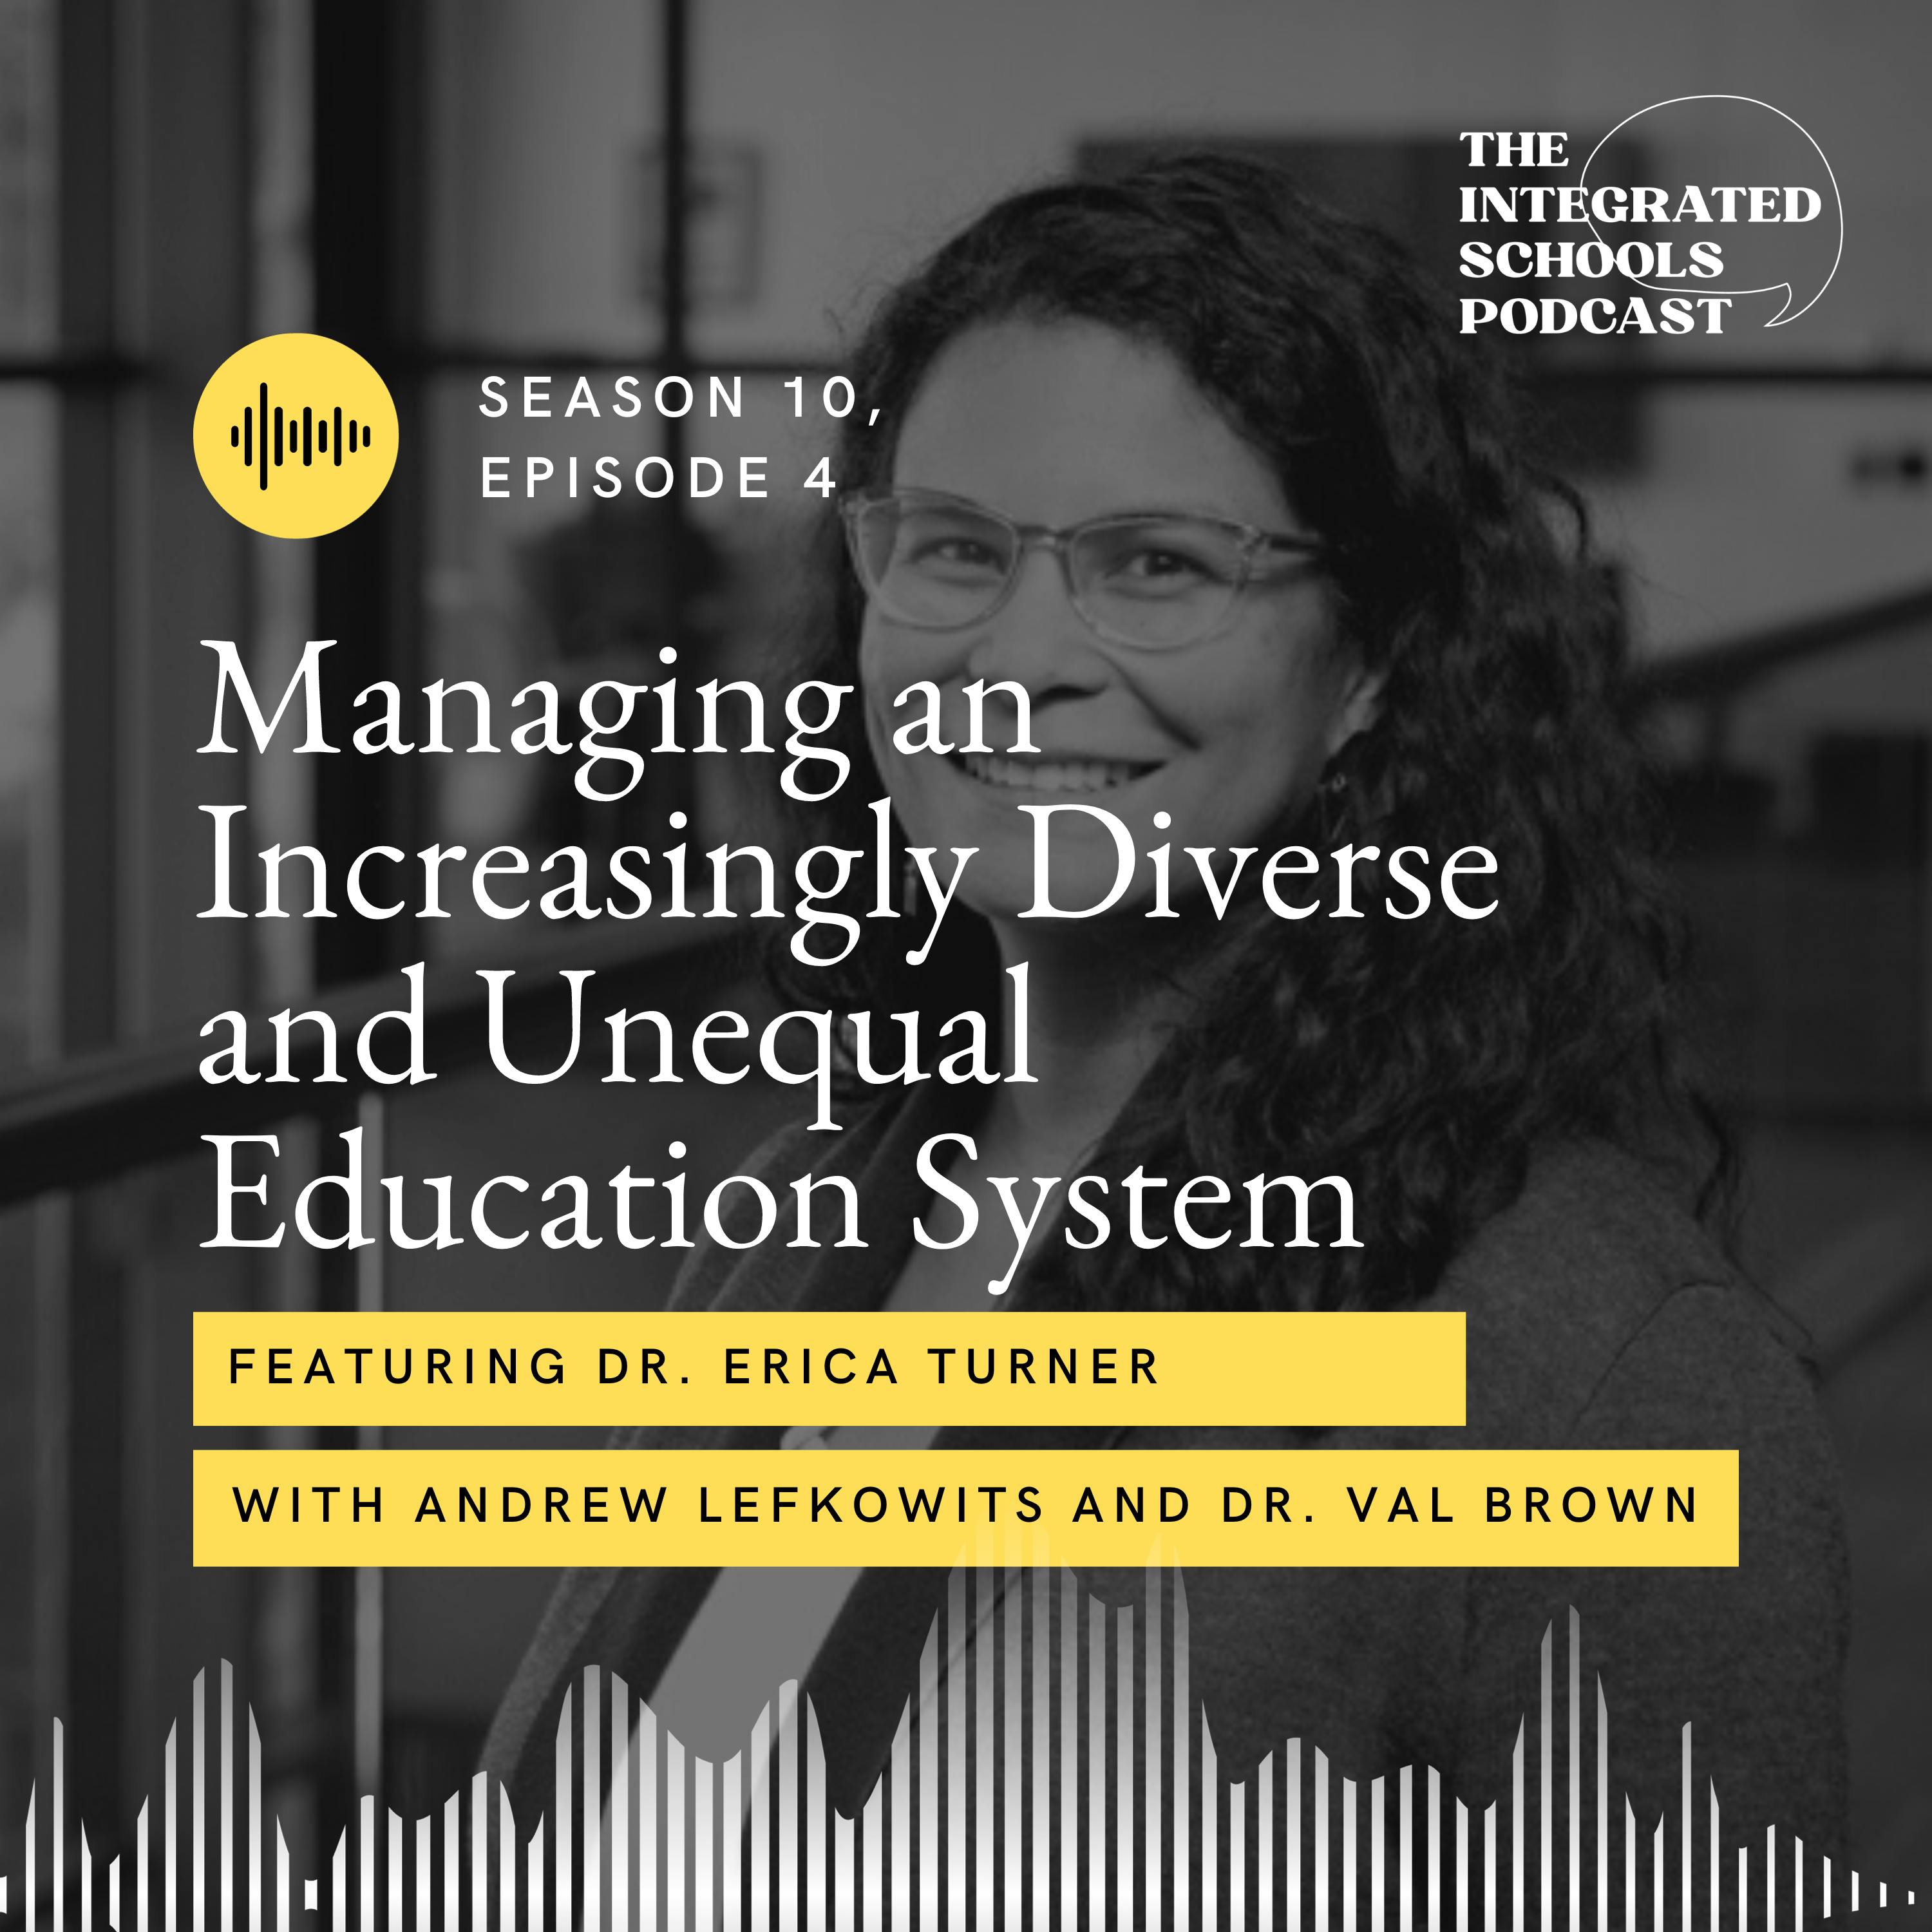 Managing an Increasingly Diverse and Unequal Education System with Dr. Erica Turner